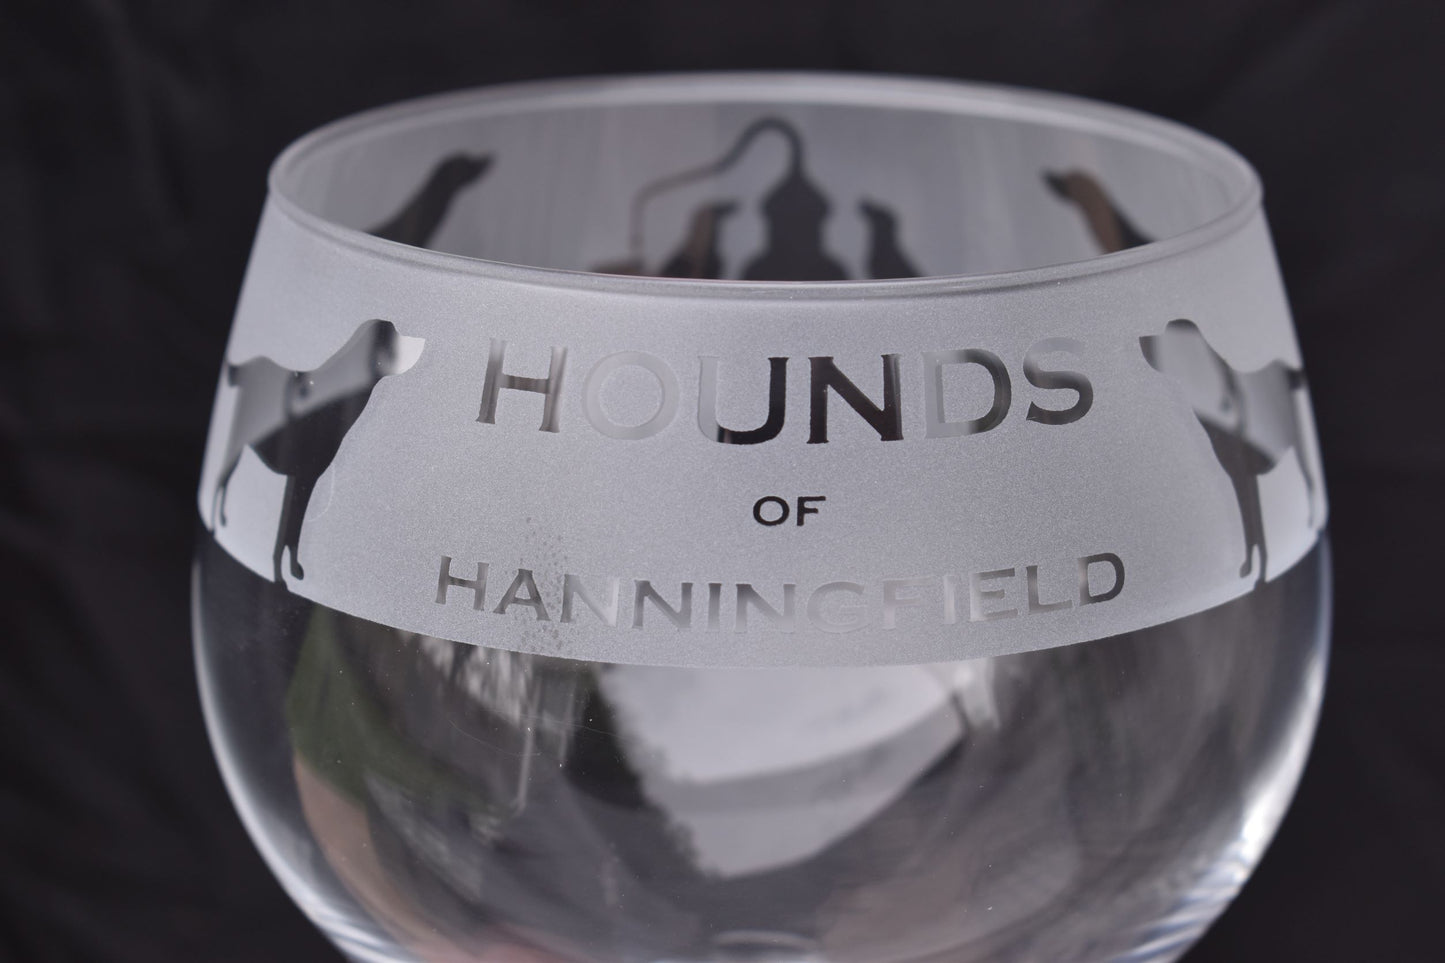 Hounds of Hanningfield Classic Gin Gift Set with etched glass